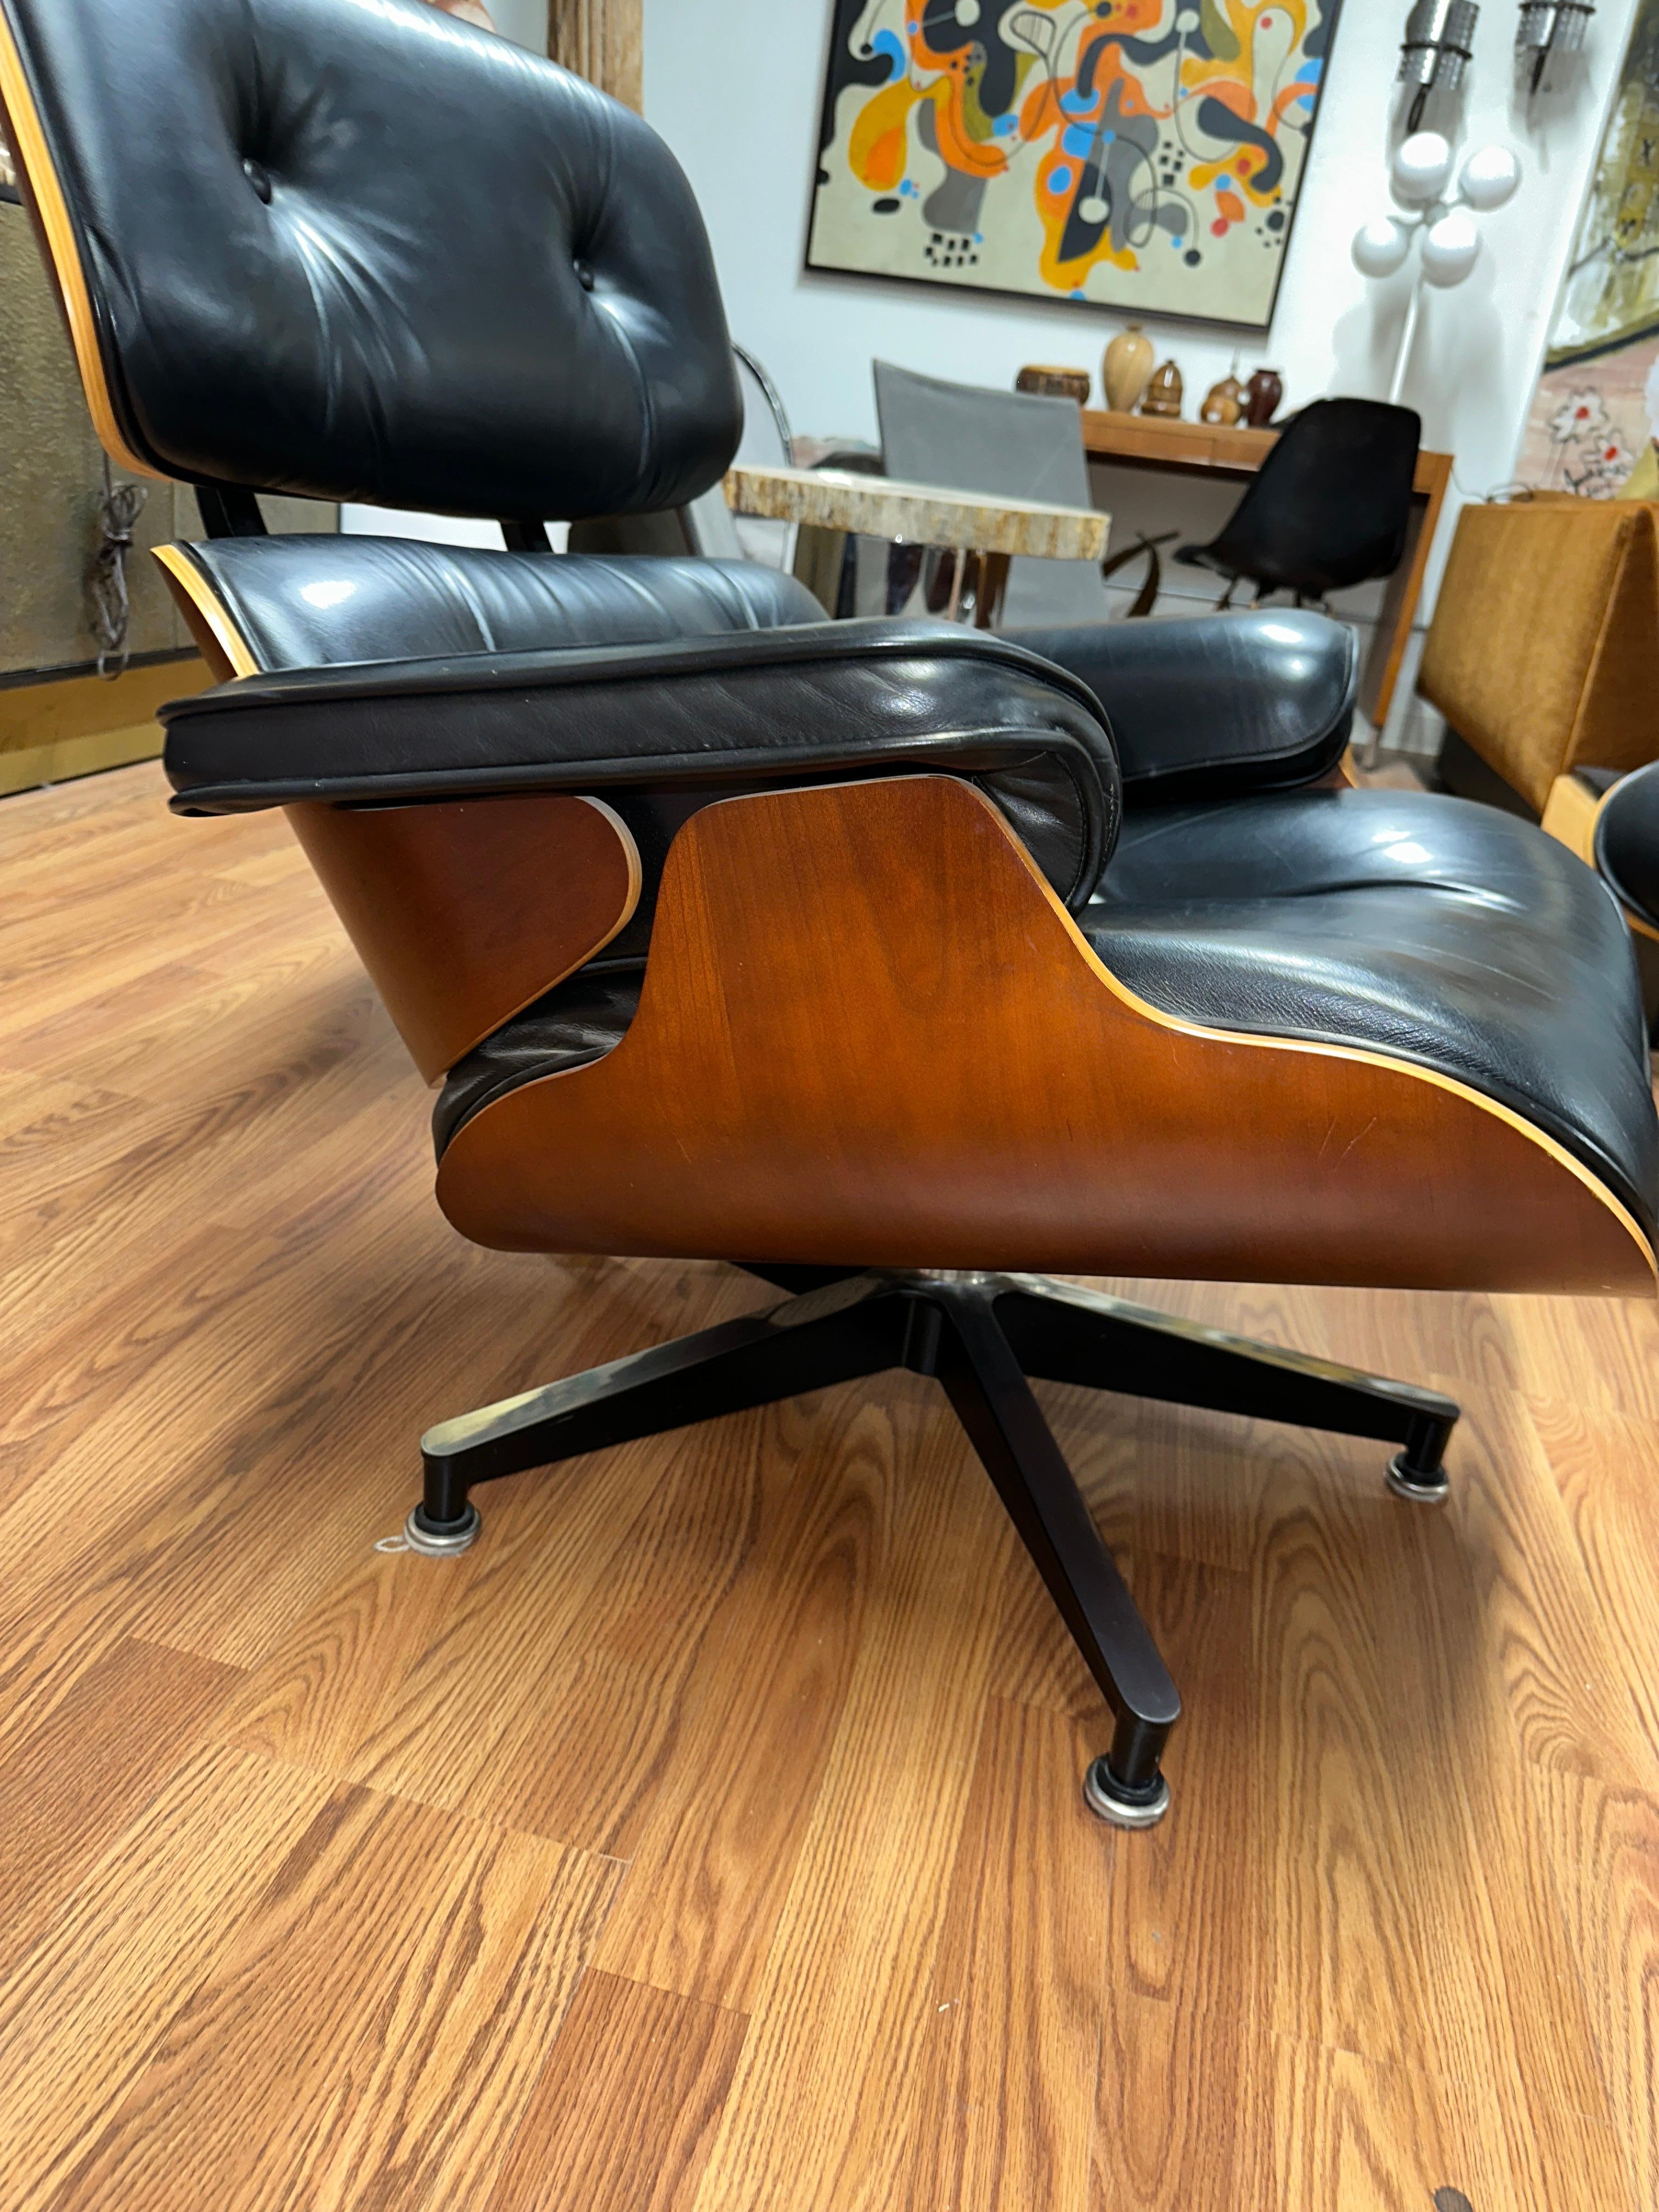 American Herman Miller Eames Chair and Ottoman in Cherry Wood